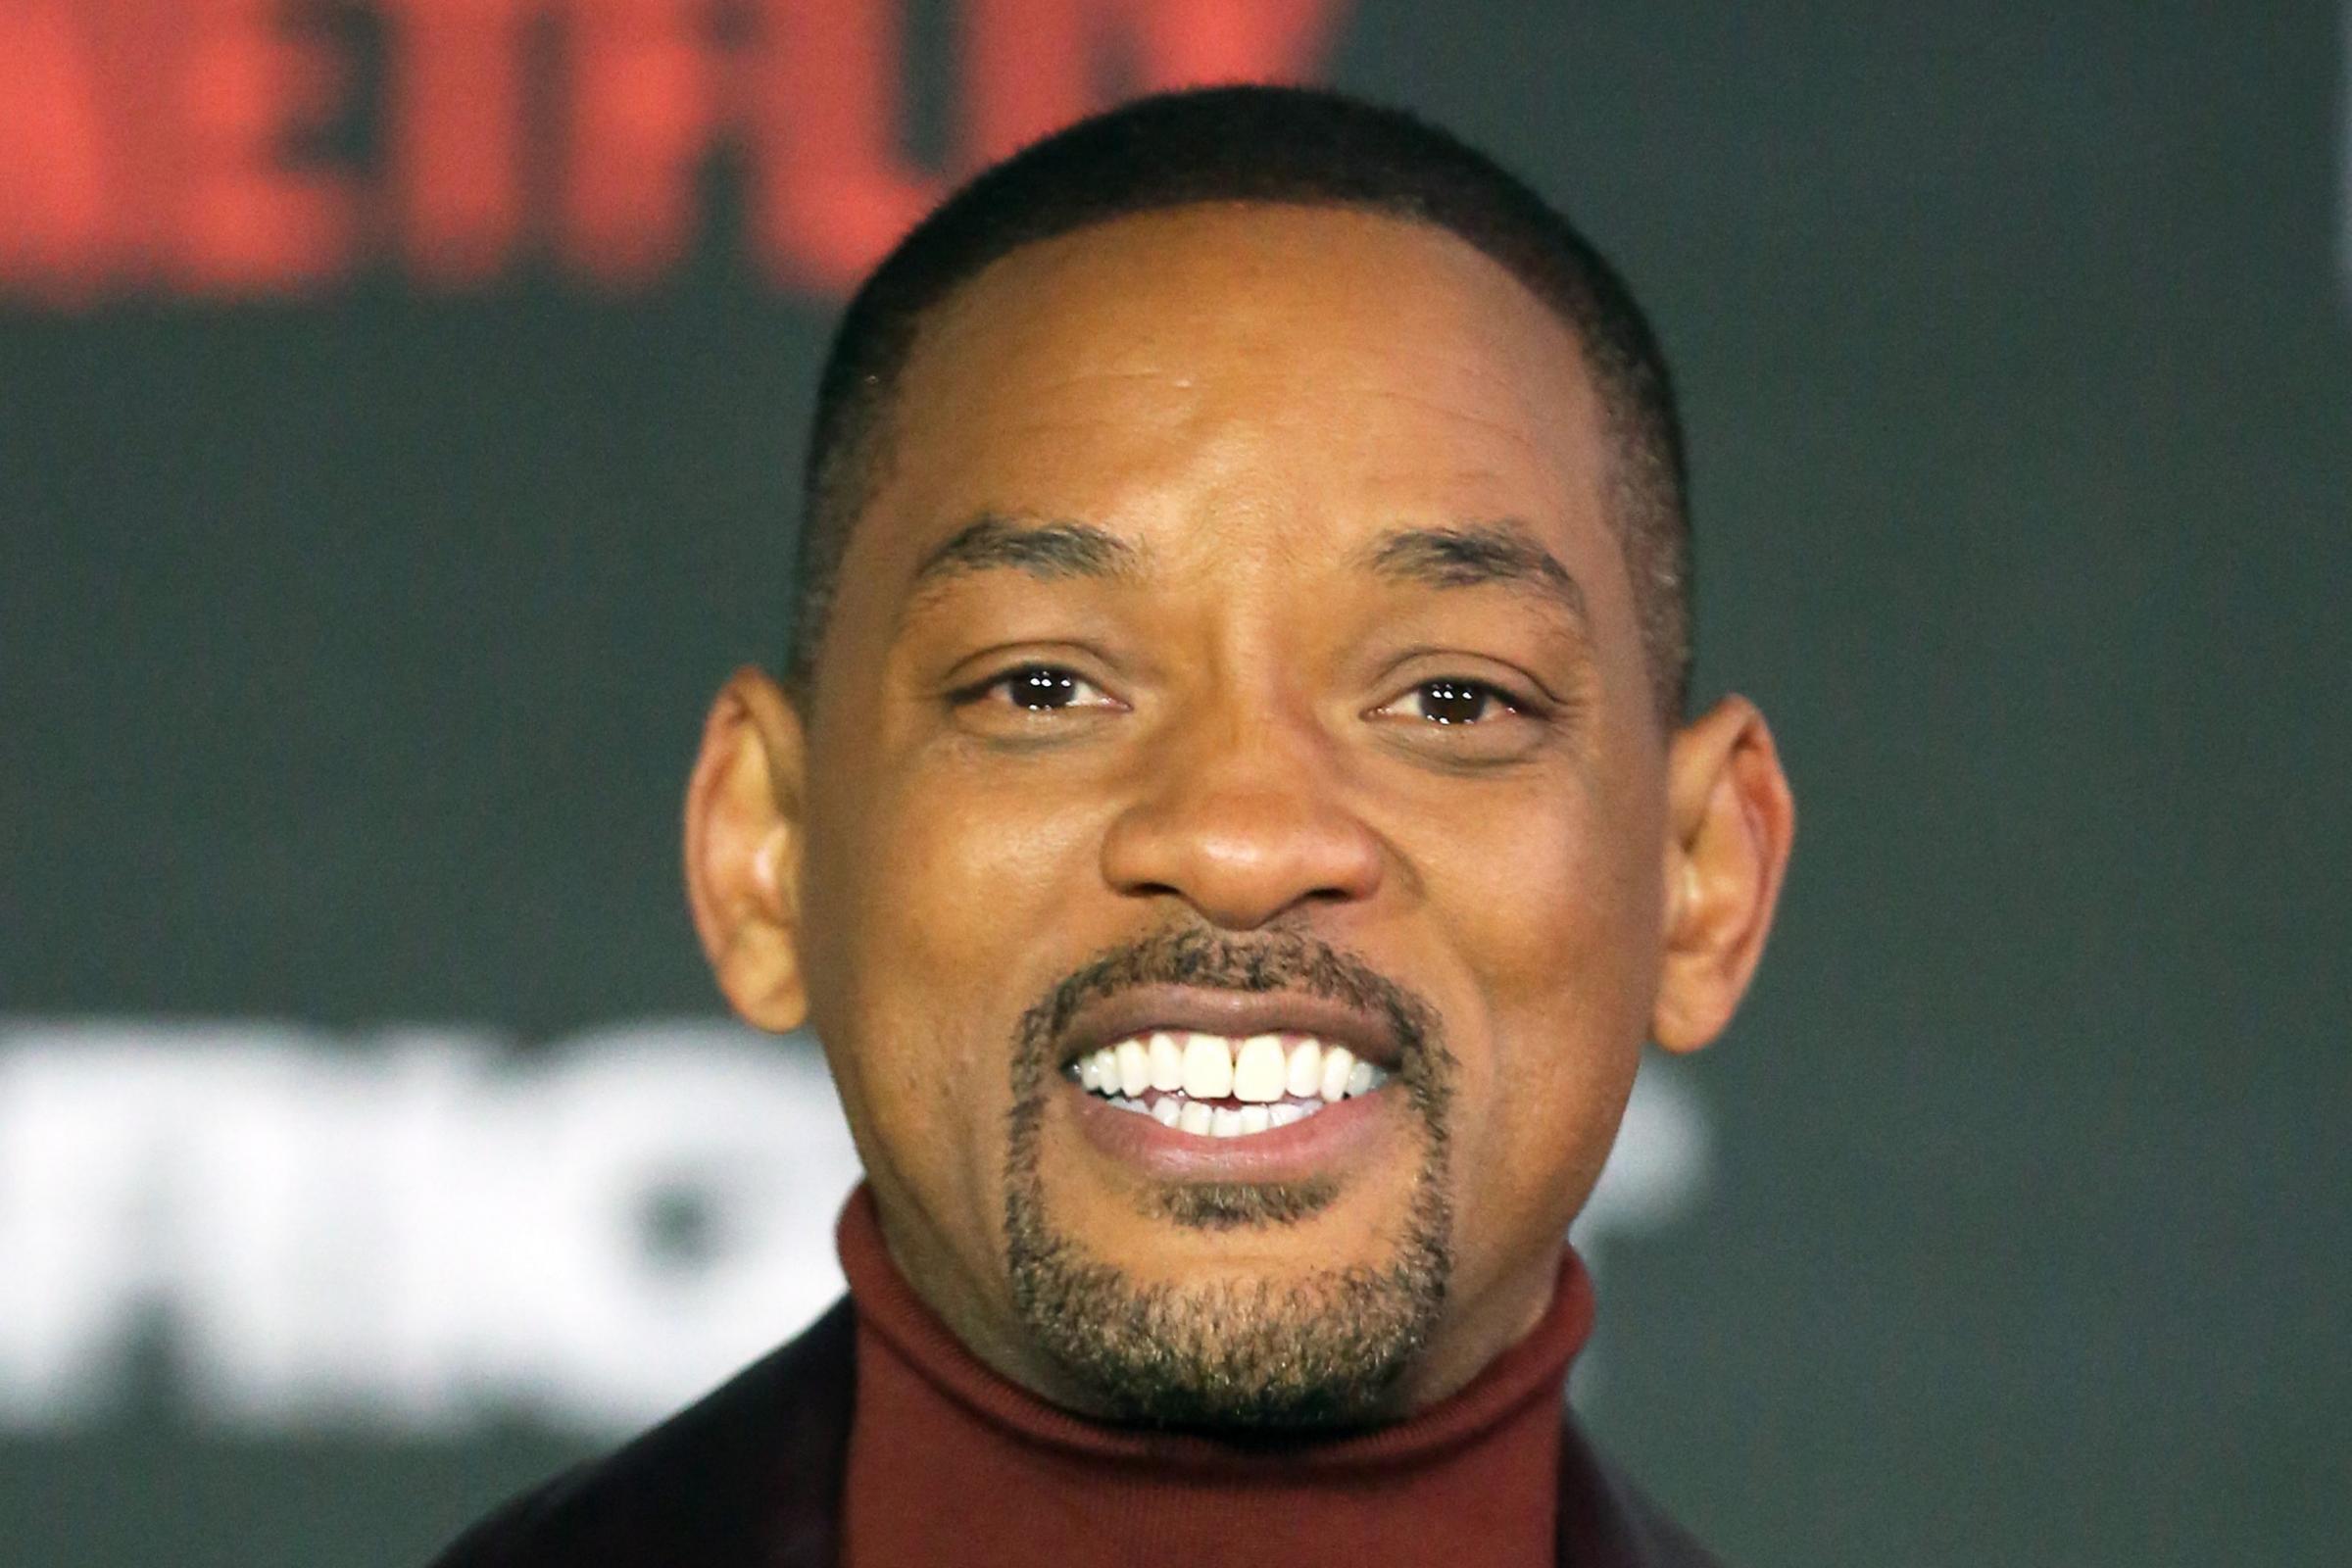 Will Smith goes up against Will Smith in Gemini Man trailer